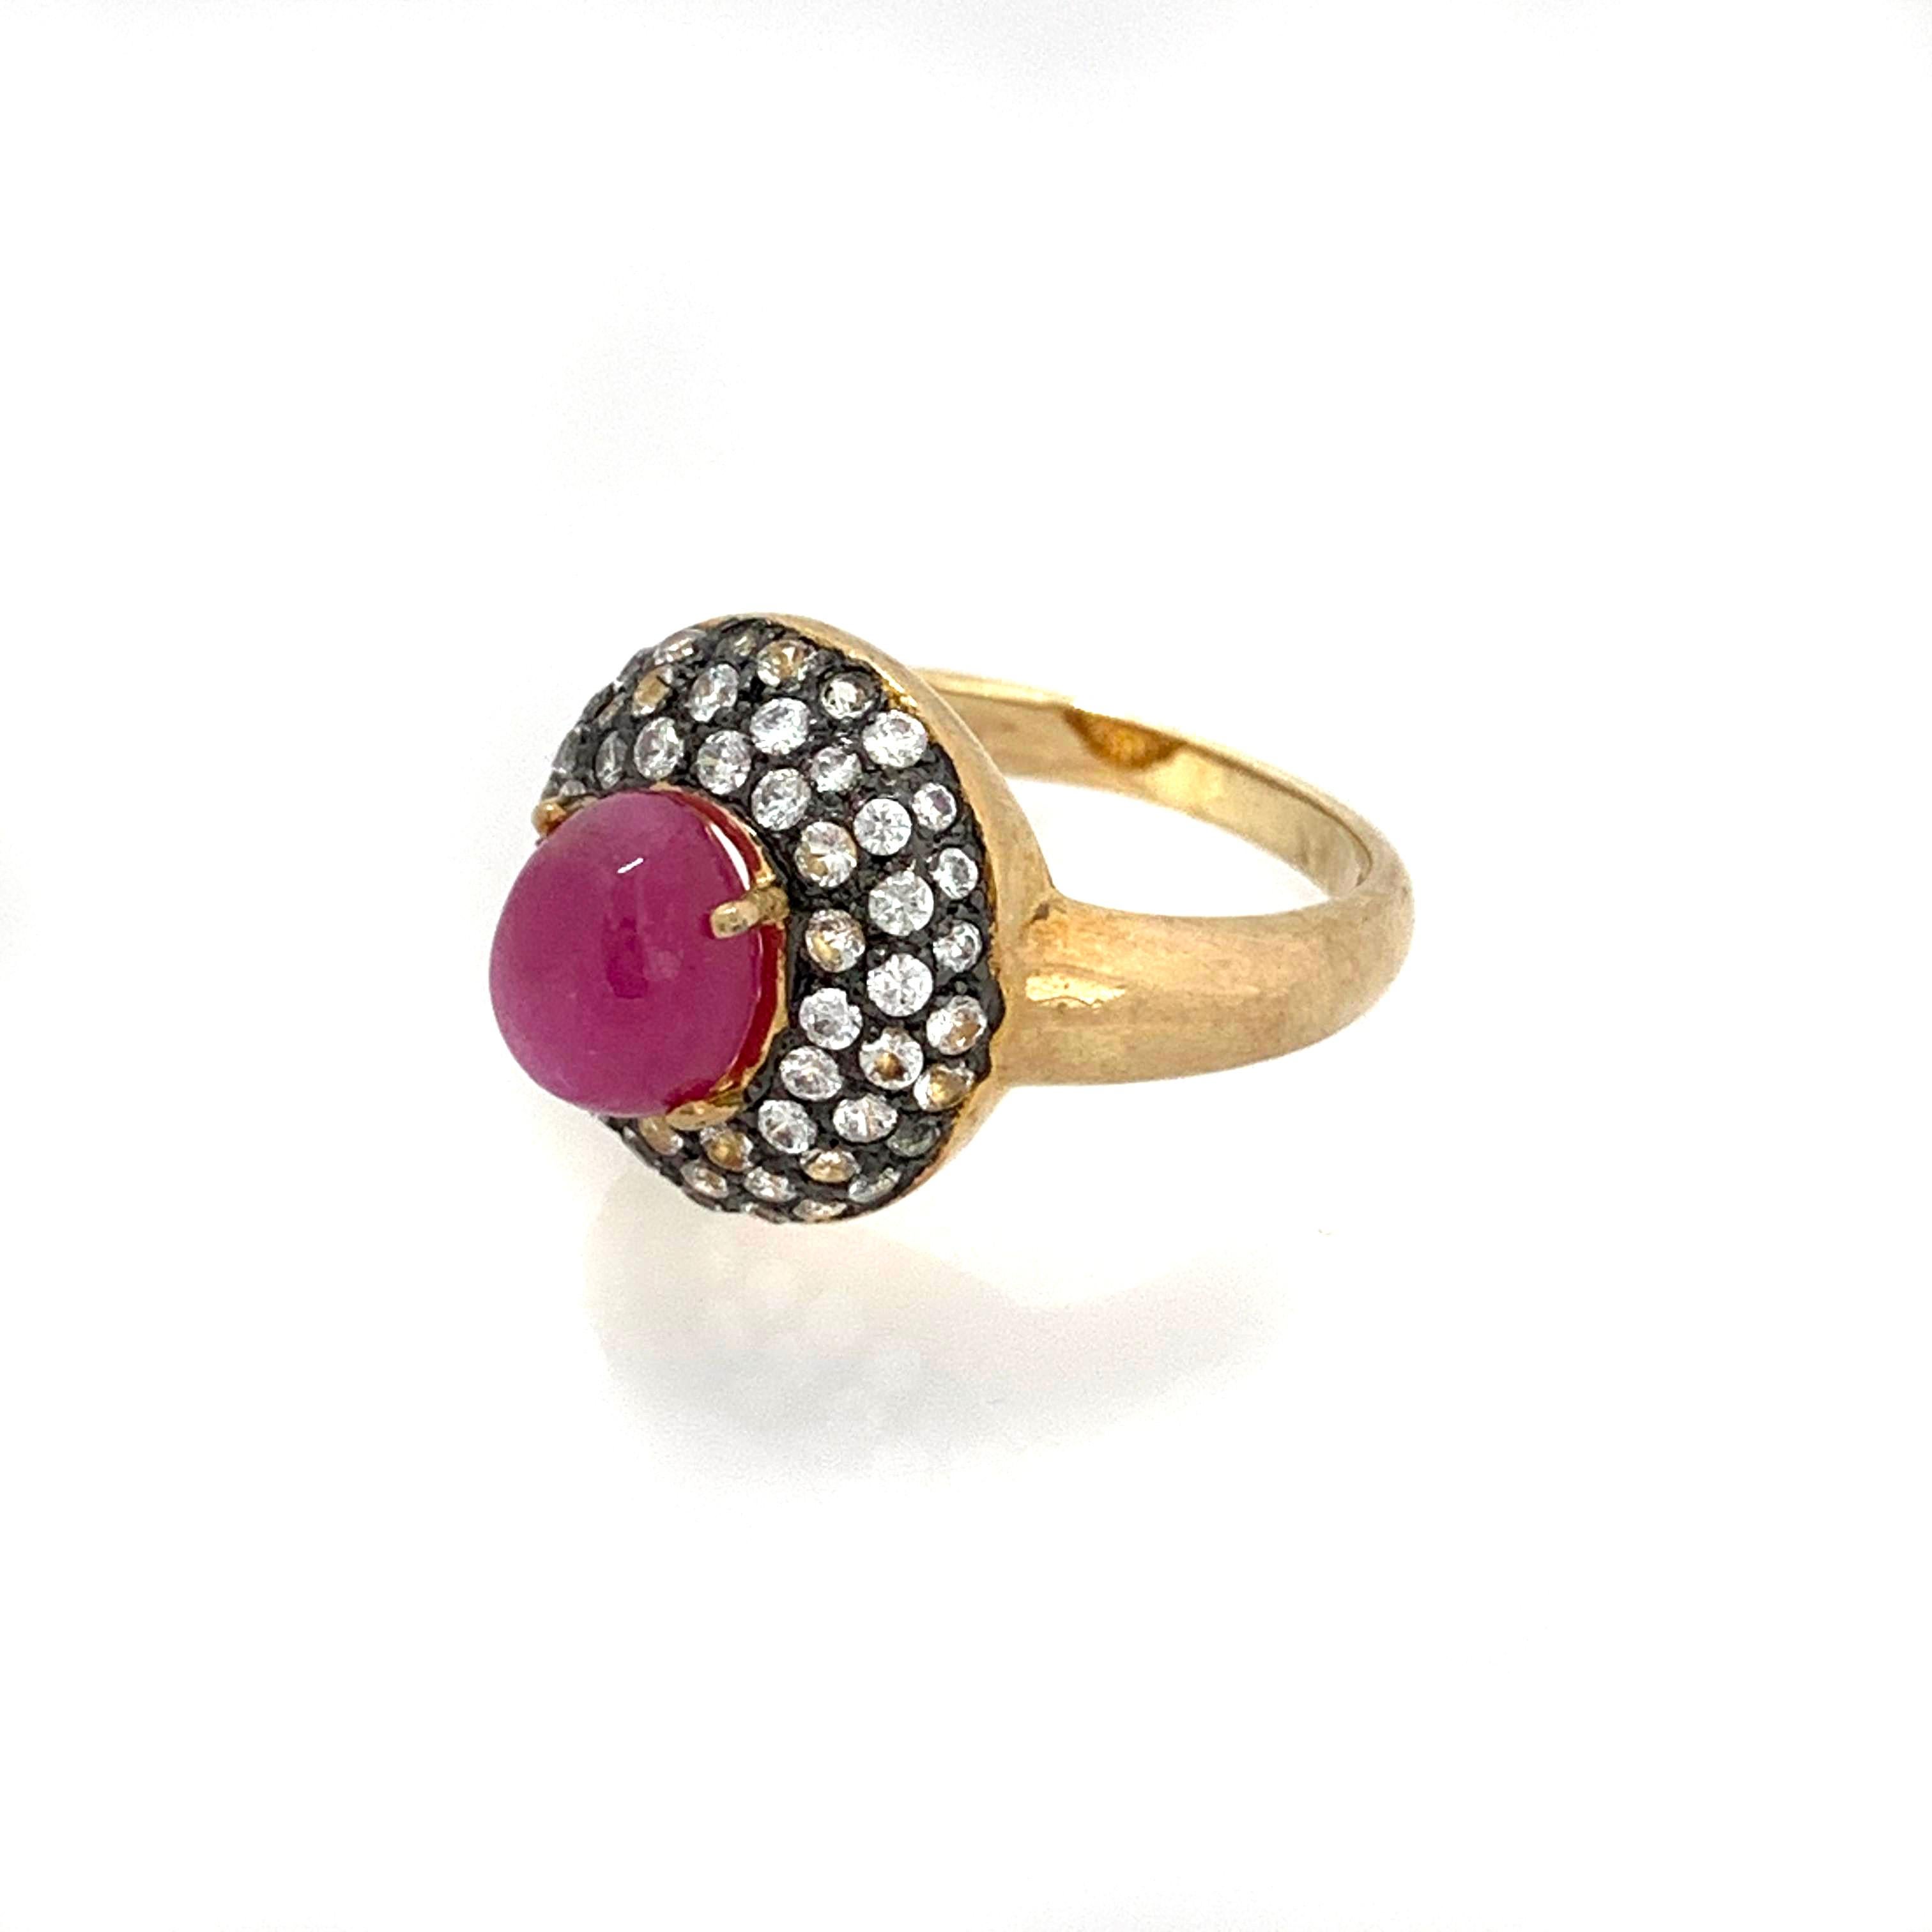 Antique-style Oval Ruby and White Topaz Bombe Cocktail Ring

This fabulous ring features a 4ct pink-ish oval cabochon-cut Mozambique ruby surrounded with 51pcs of round white topaz, handset in two-tone 18k gold vermeil and black rhodium gilded over